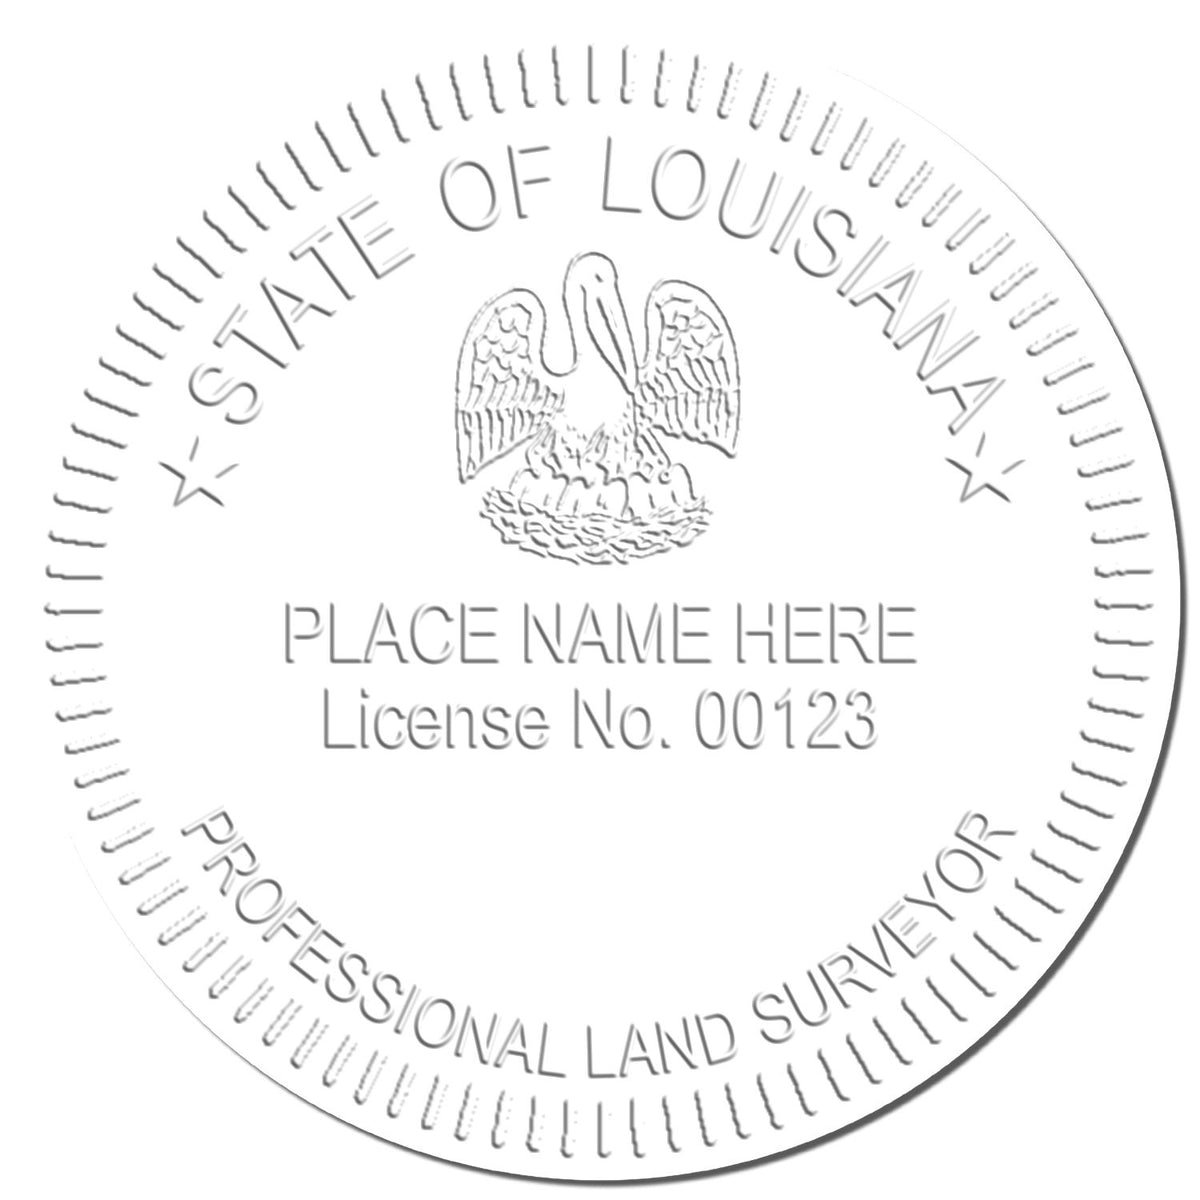 This paper is stamped with a sample imprint of the Heavy Duty Cast Iron Louisiana Land Surveyor Seal Embosser, signifying its quality and reliability.